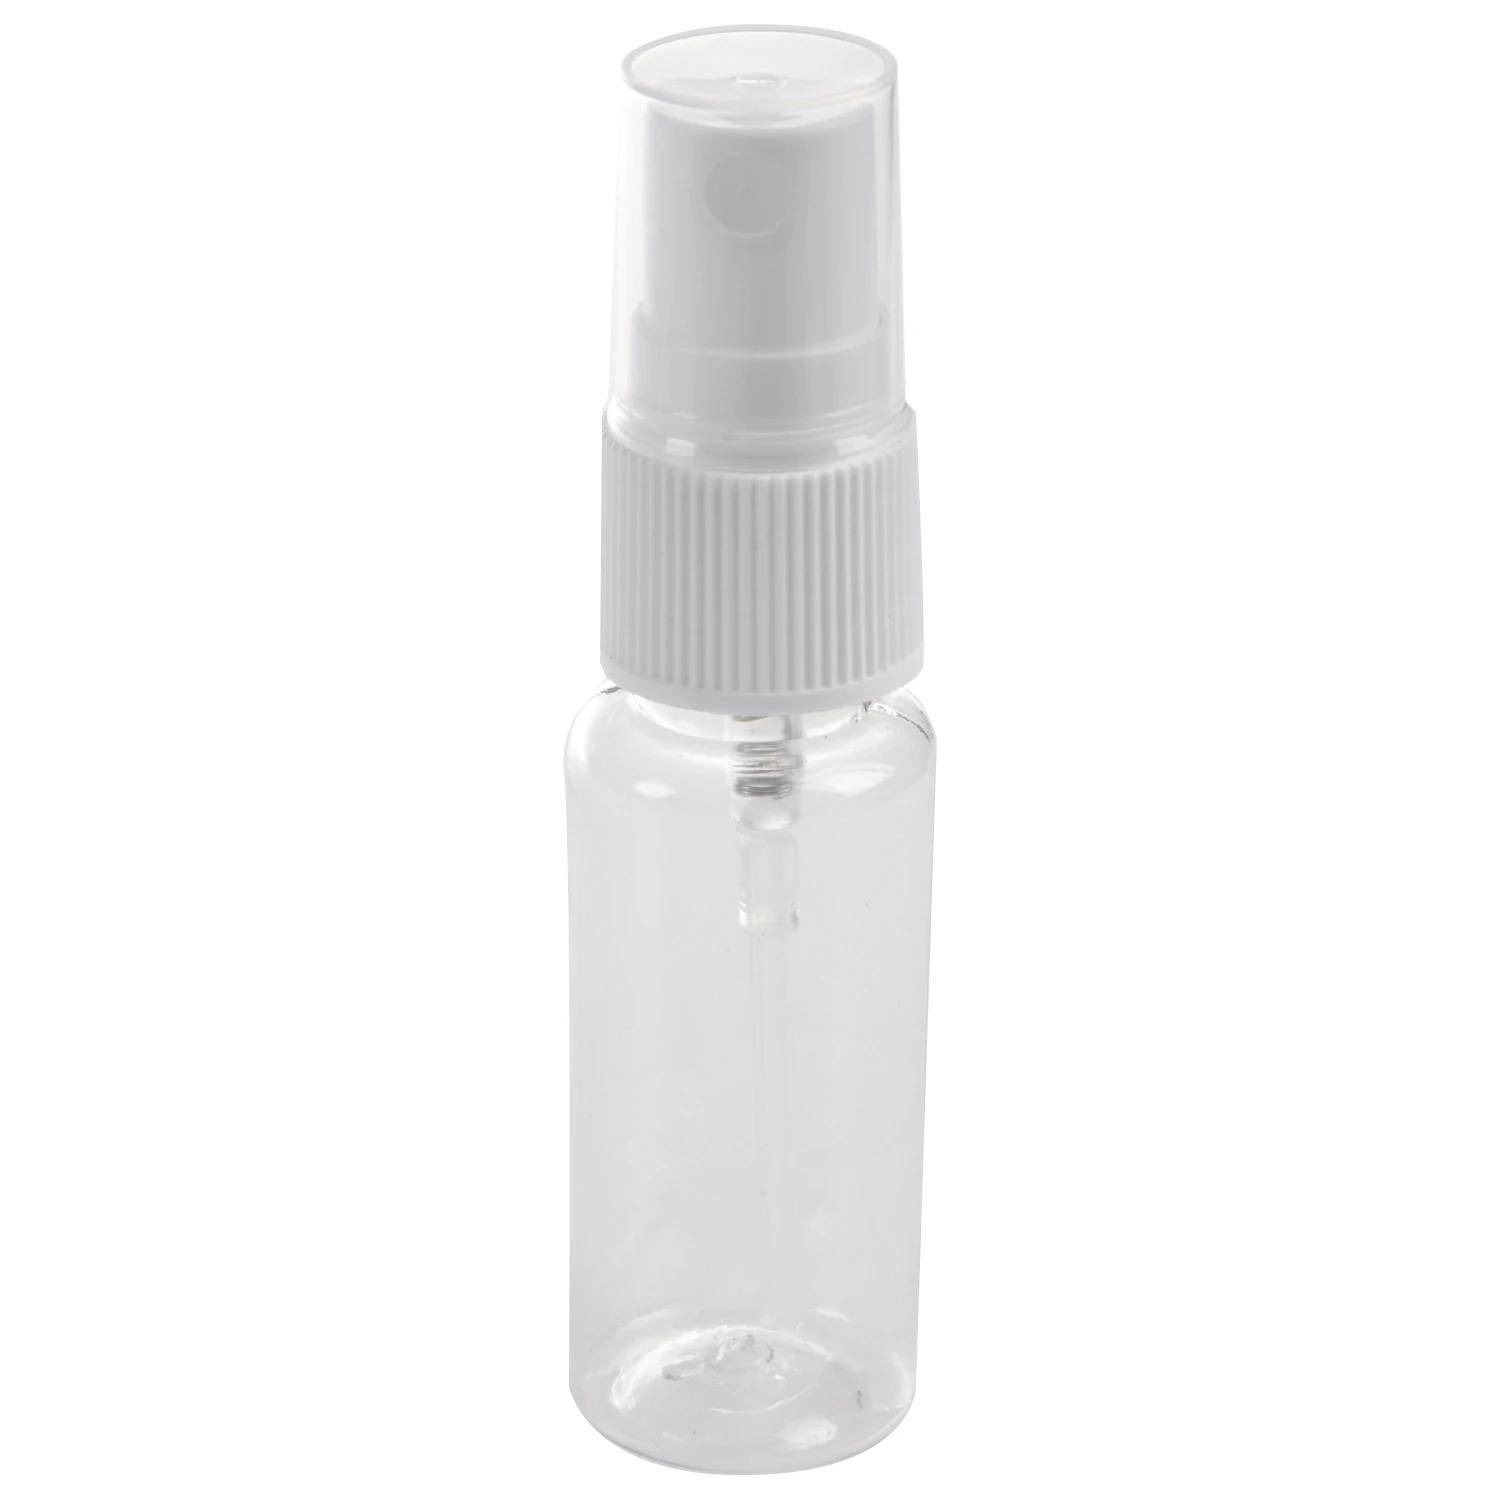 

20 Packs of Clear Plastic Fine Mist Spray Bottle,20Ml,For Essential Oils, Travel, Perfumes and More